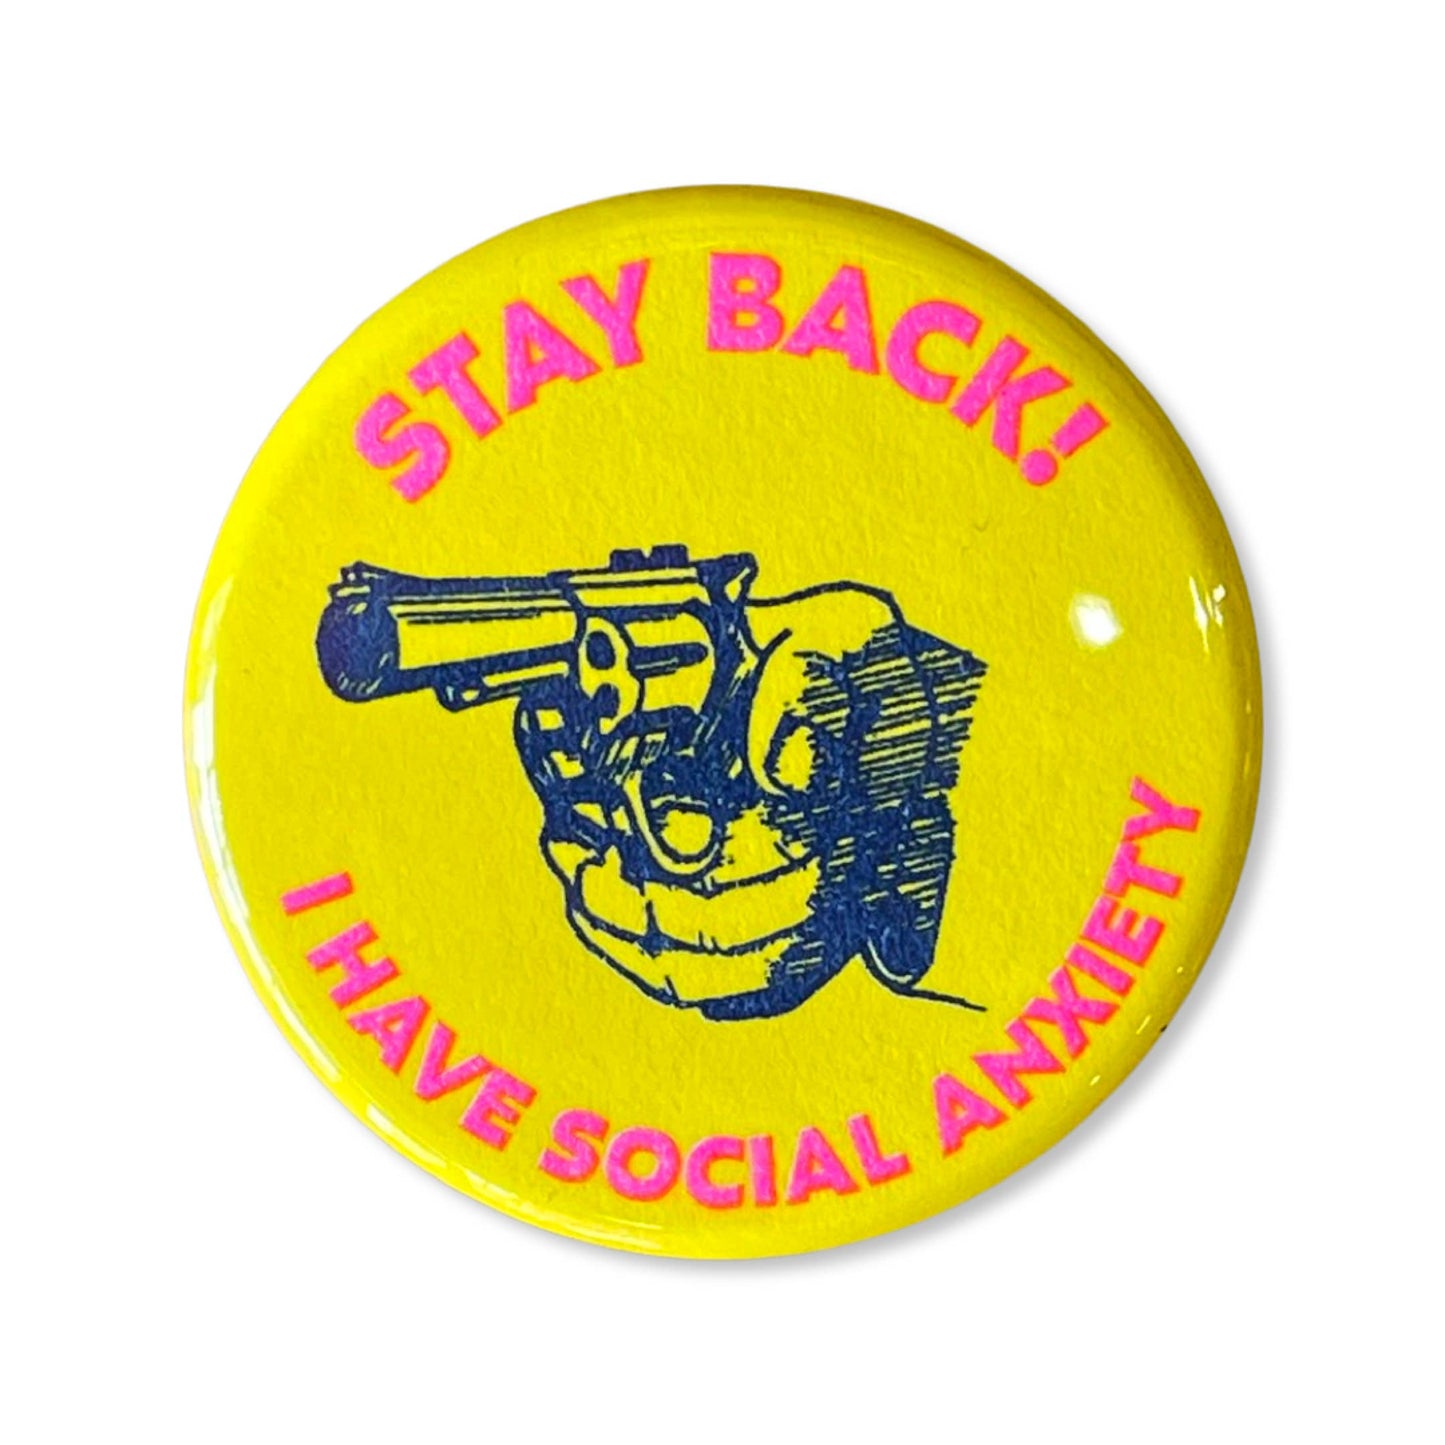 Stay Back! Social Anxiety 1¾" Button